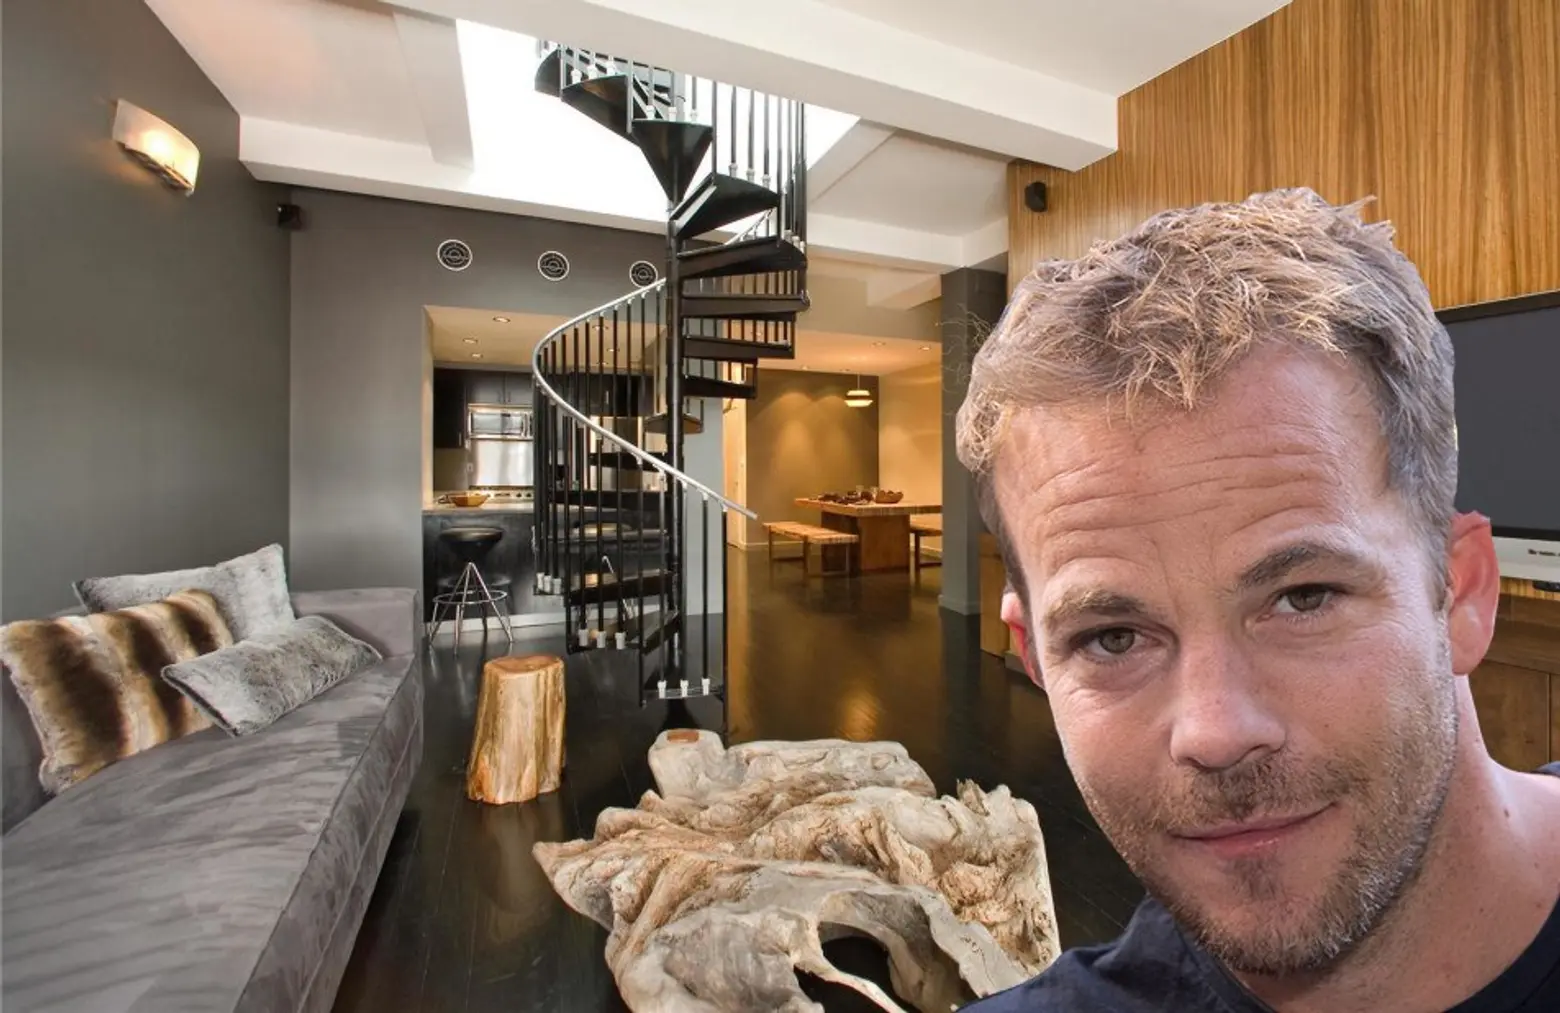 Actor Stephen Dorff gets $2.7M for bachelor-friendly Chelsea penthouse